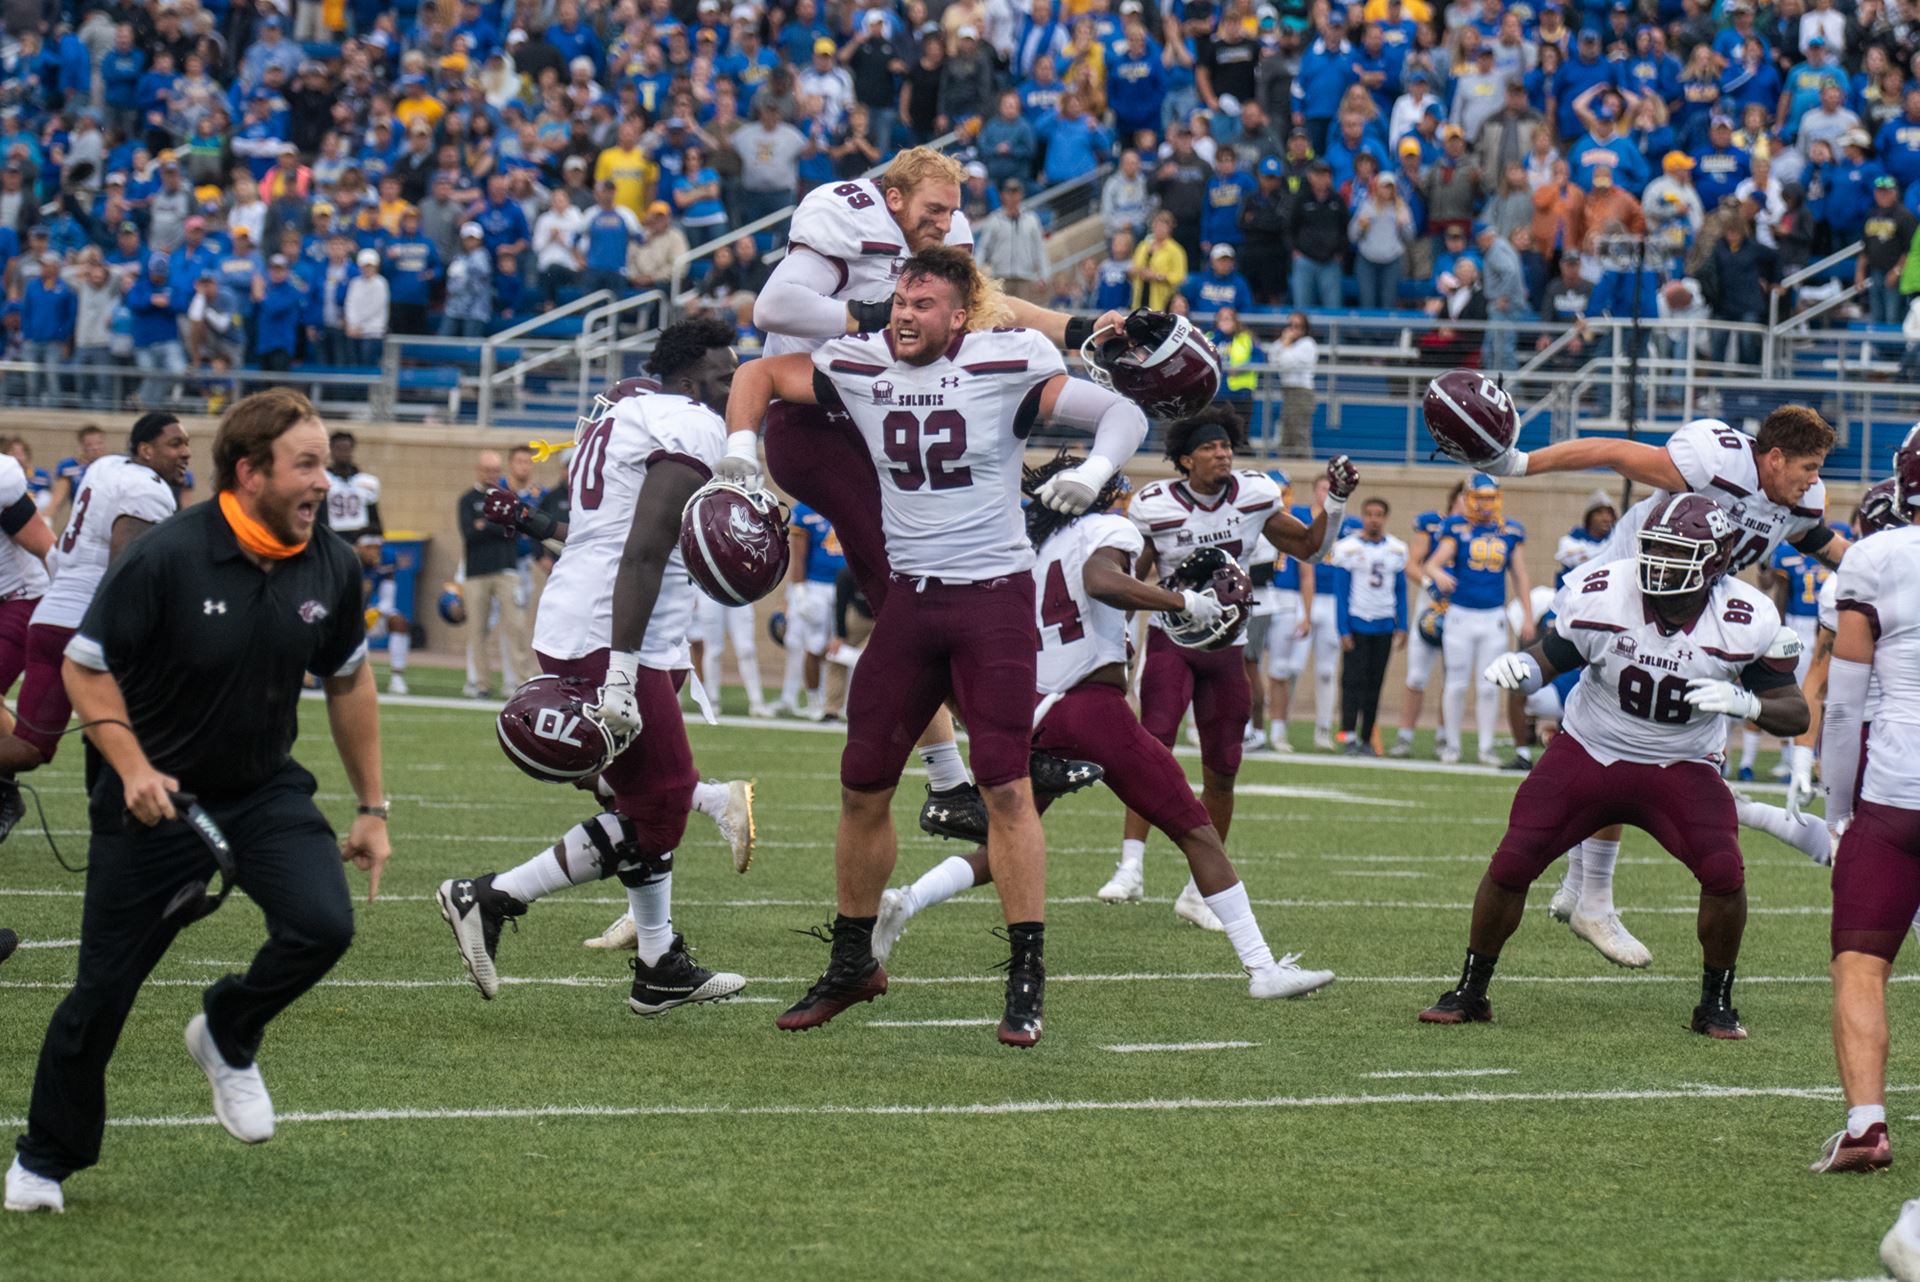 Comeback Kids: How FCS Playoff Teams Have Performed in the Clutch